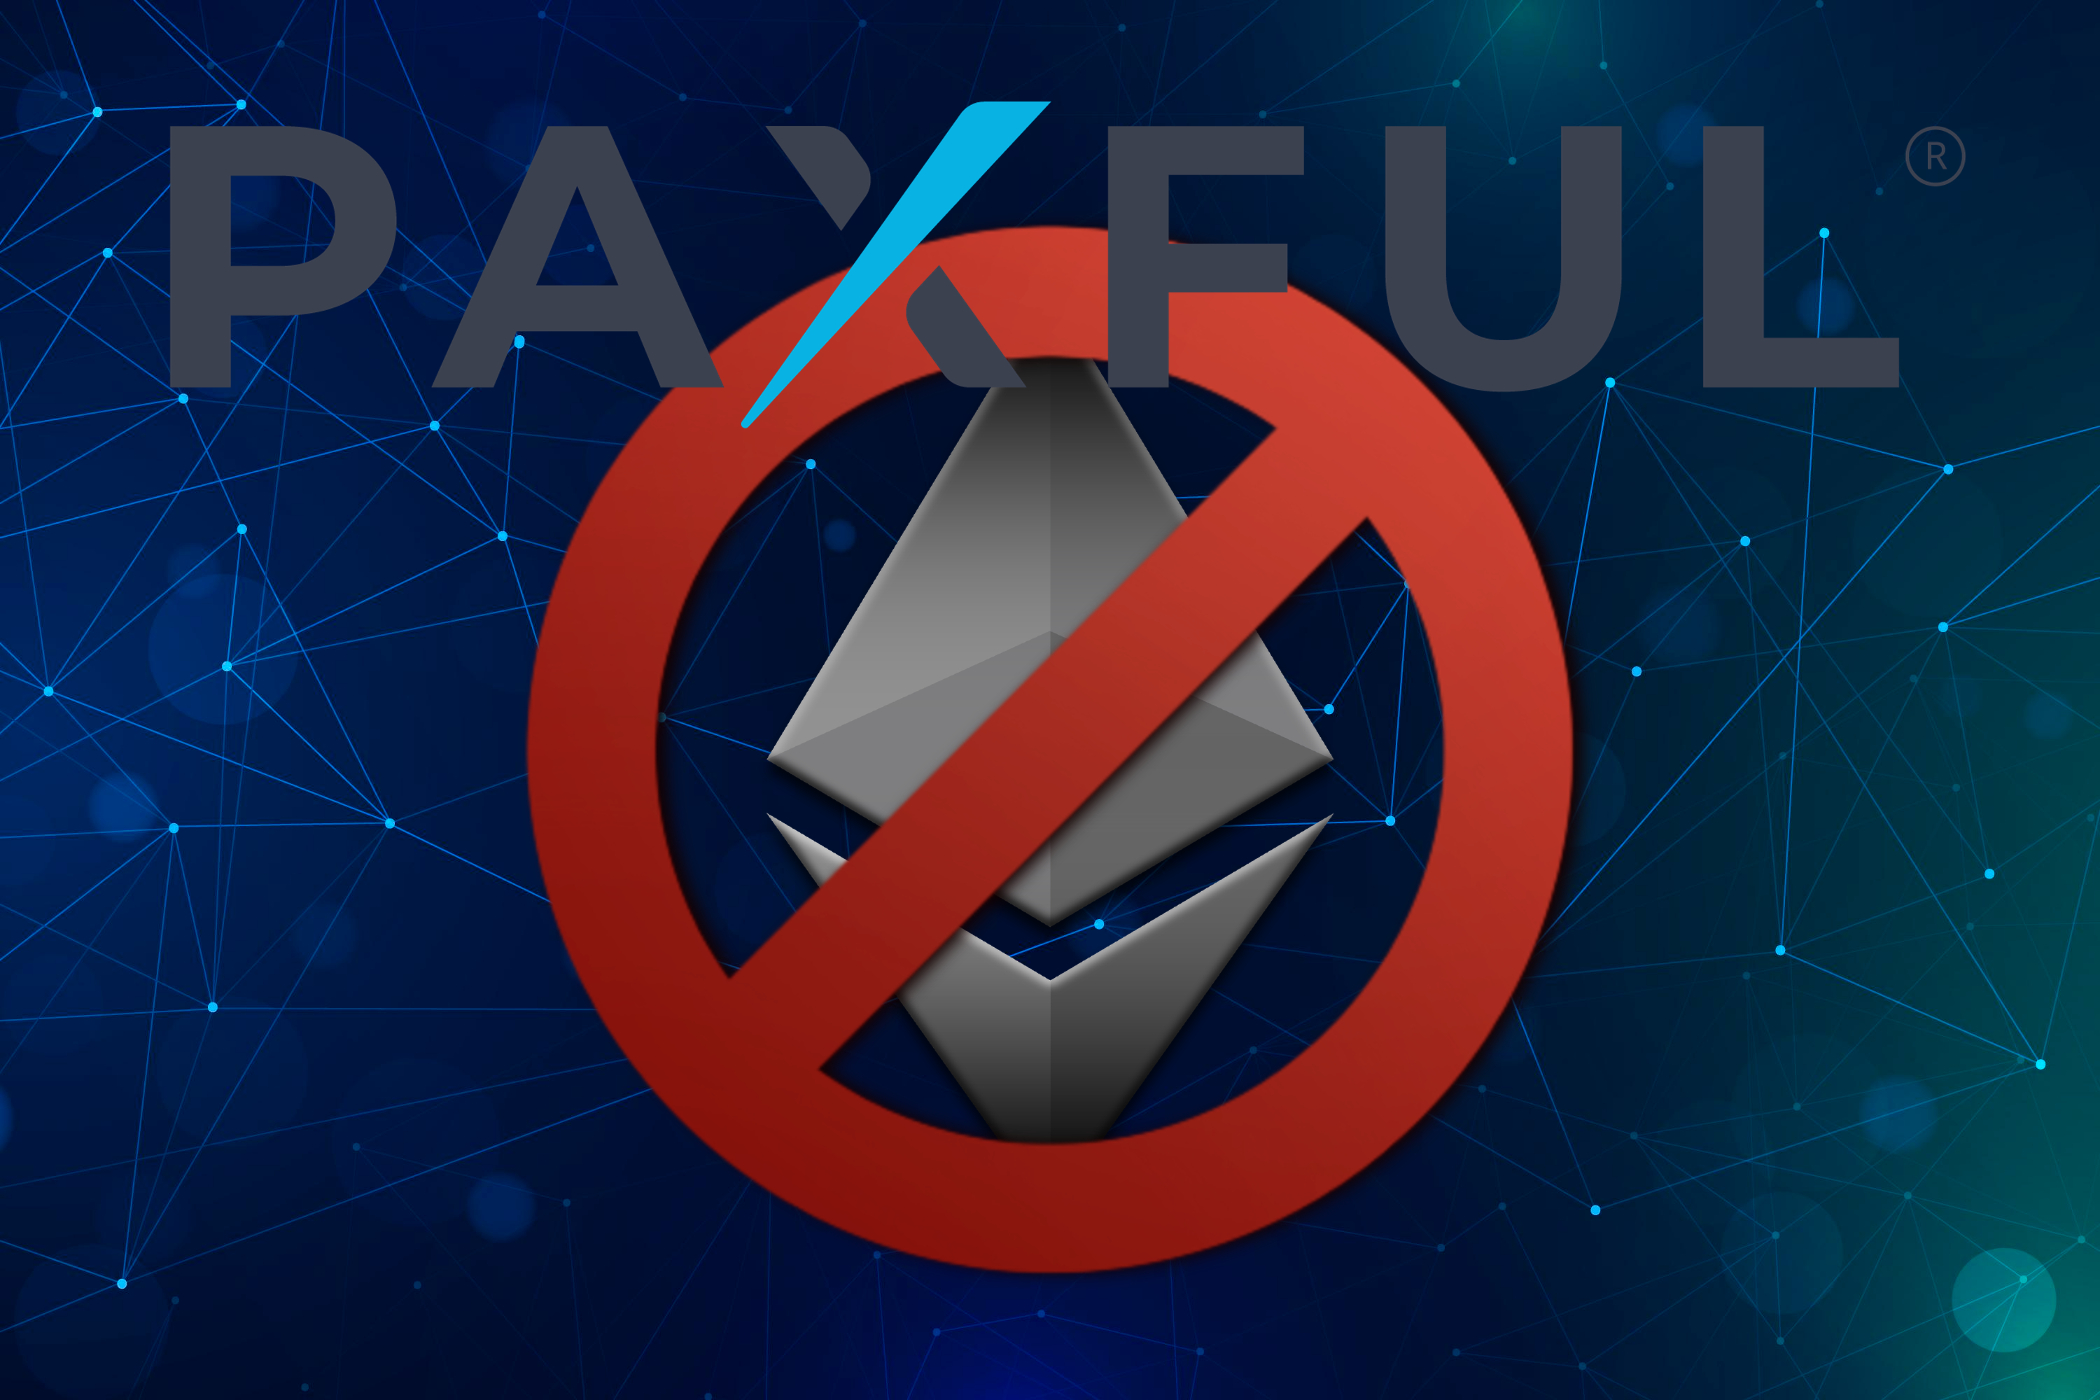 Paxful bans Ethereum (ETH) from its platform, CEO says "integrity trumps all"